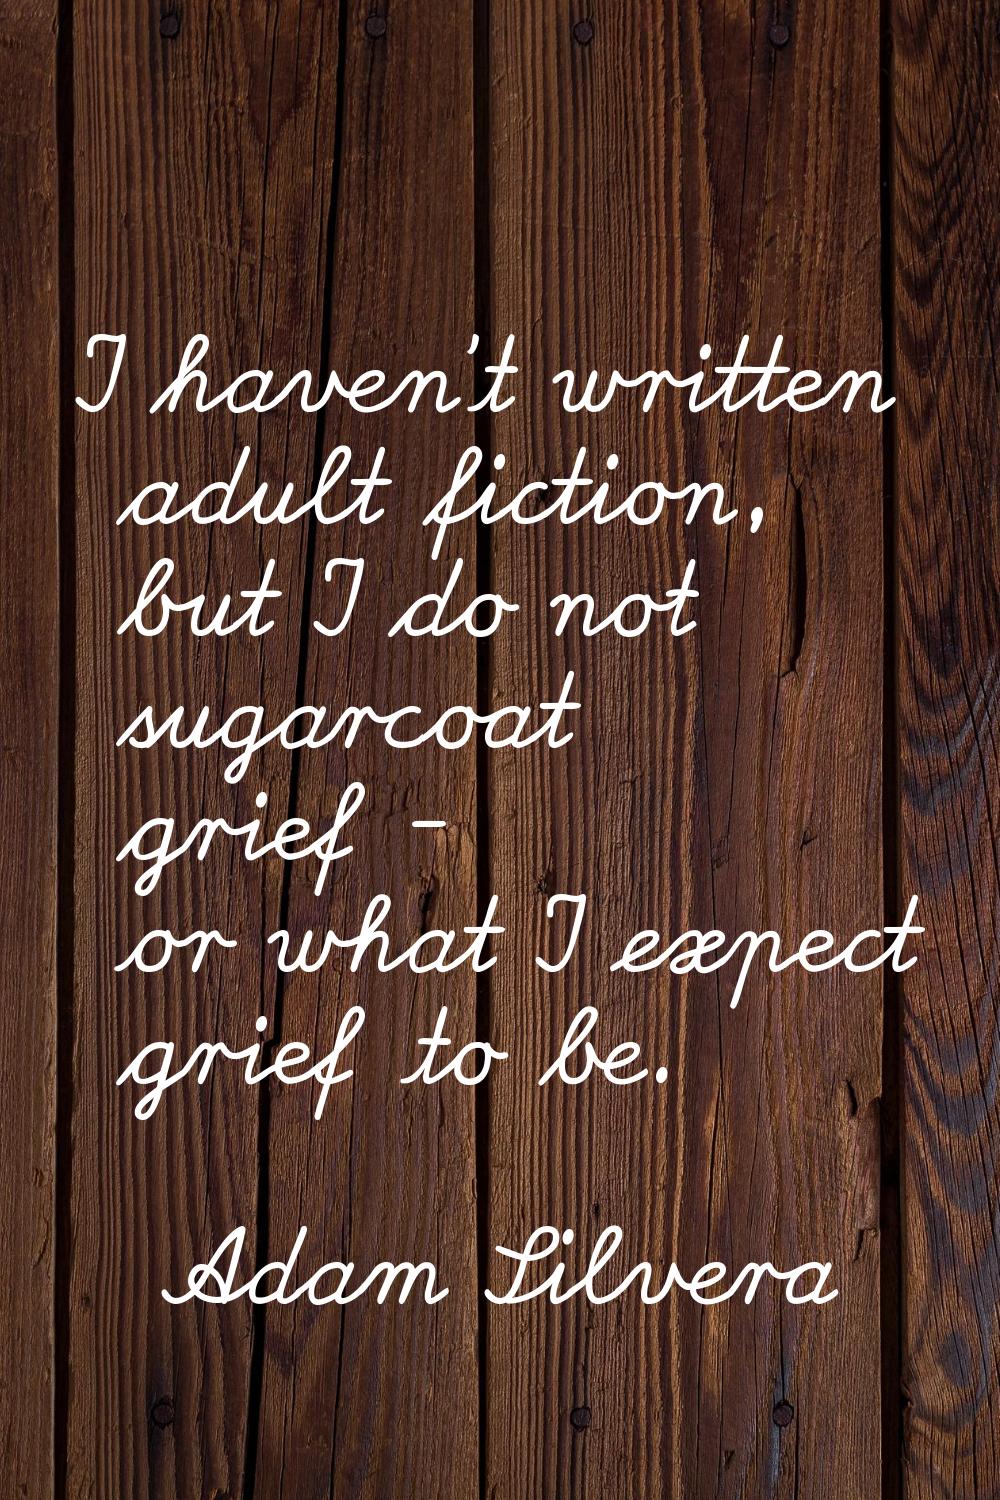 I haven't written adult fiction, but I do not sugarcoat grief - or what I expect grief to be.